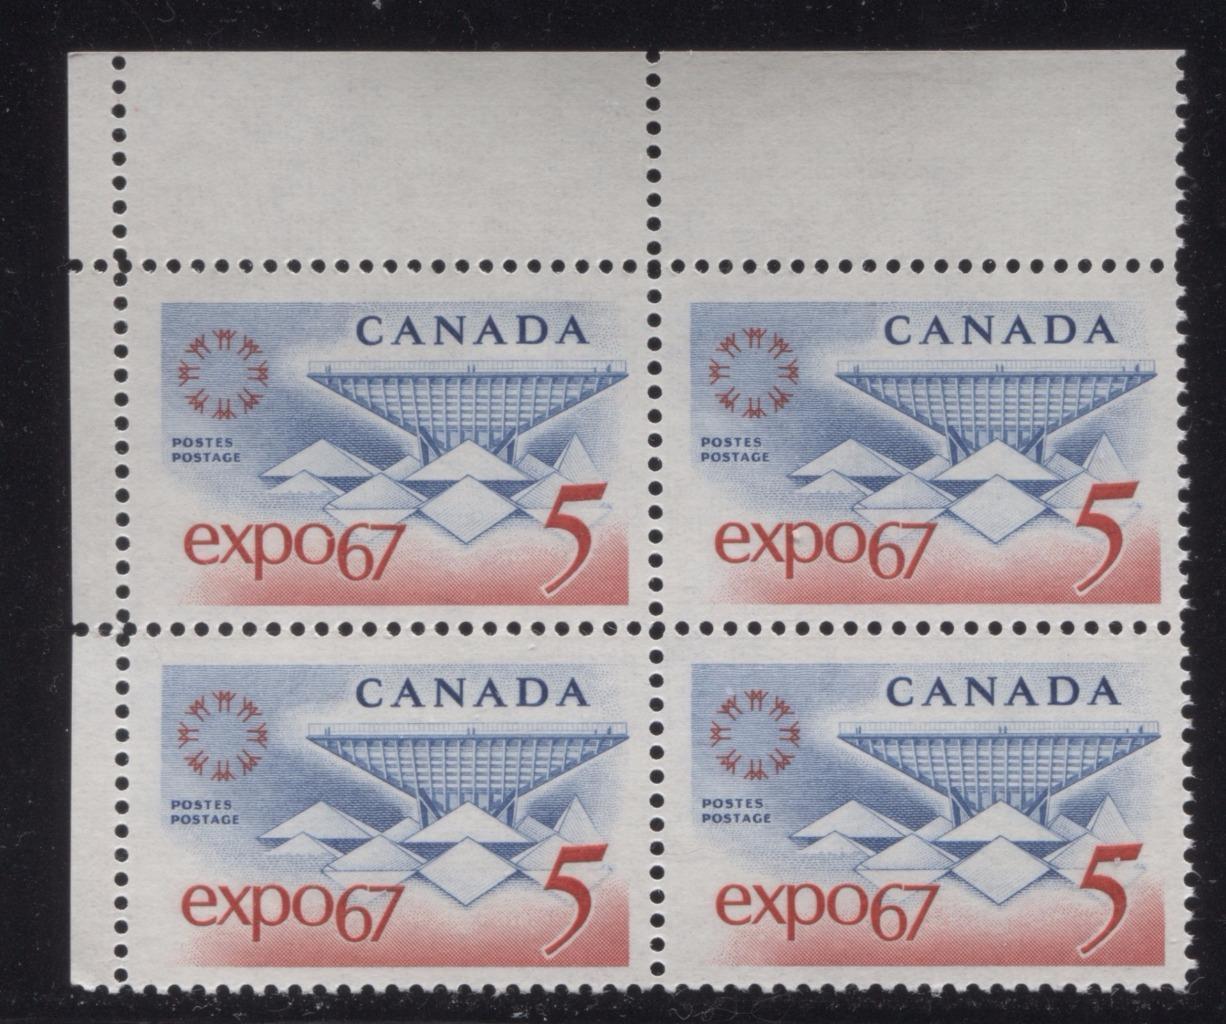 Canada #469 (SG#611) 5c Blue and Red Expo 67 LF-fl IV, LF, 1-2 Fibres Paper, Streaky Gum UL Block VF-75 NH Brixton Chrome 